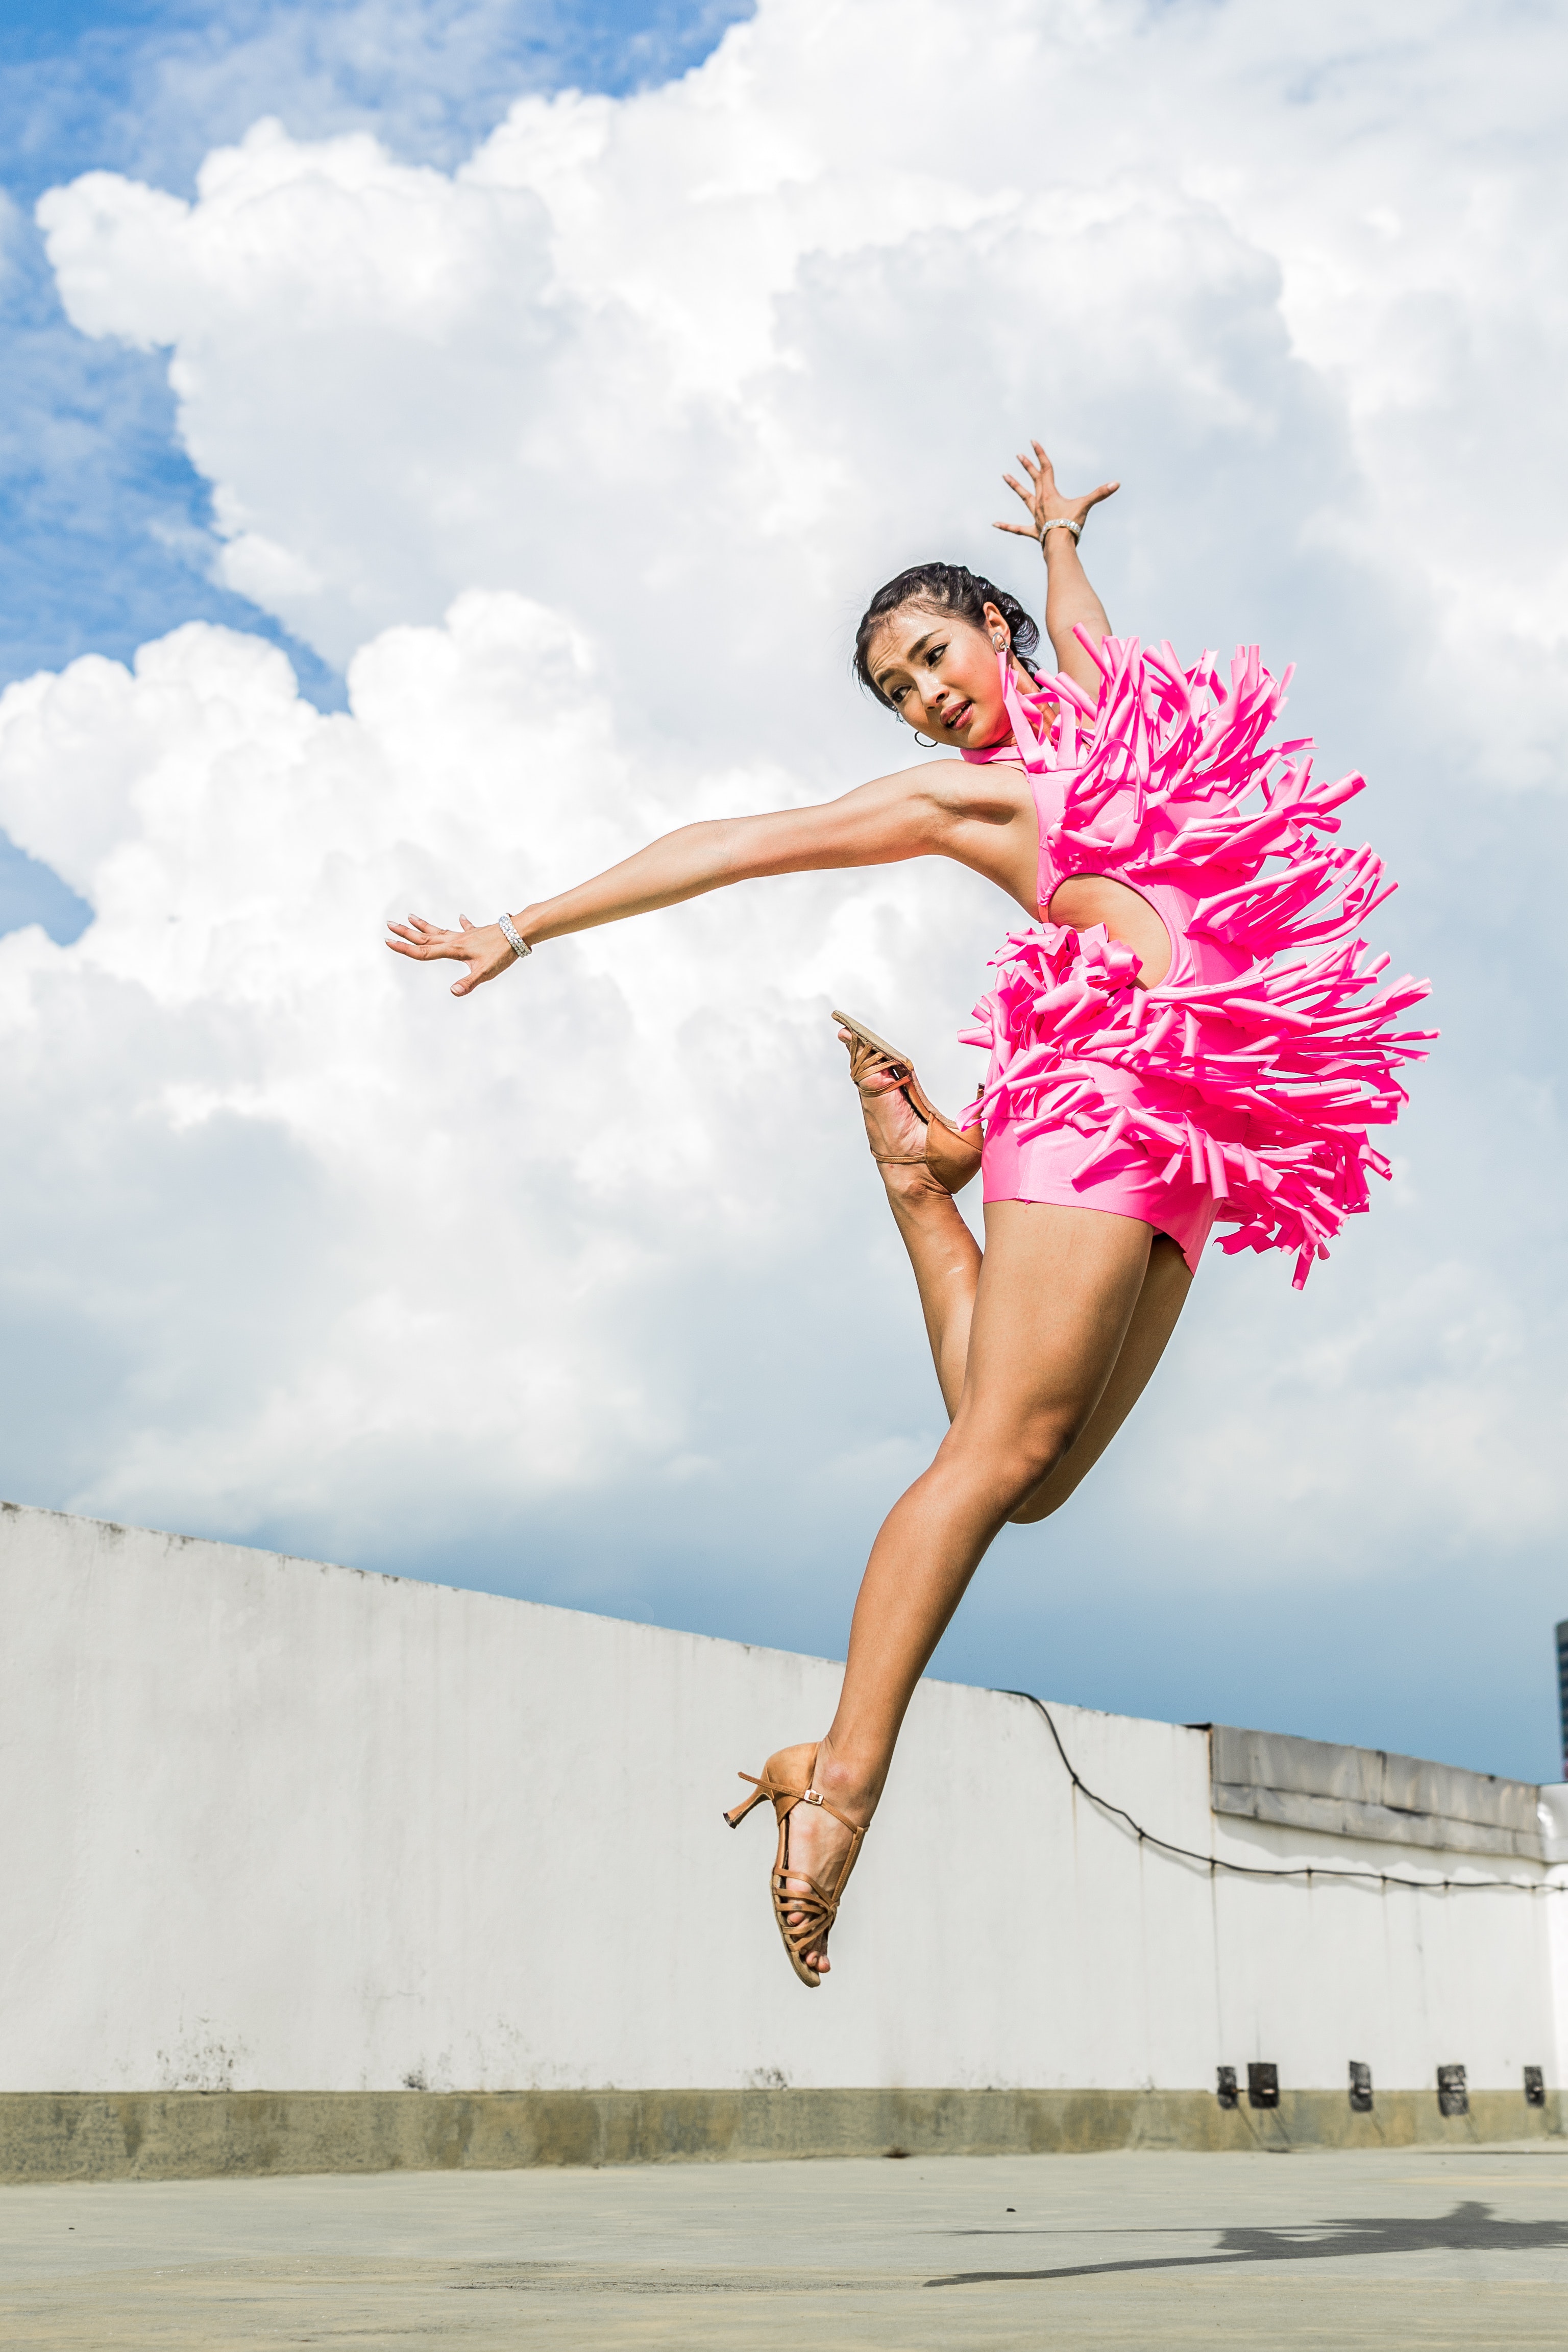 Woman in pink dress doing jump shot while extending arms 690596